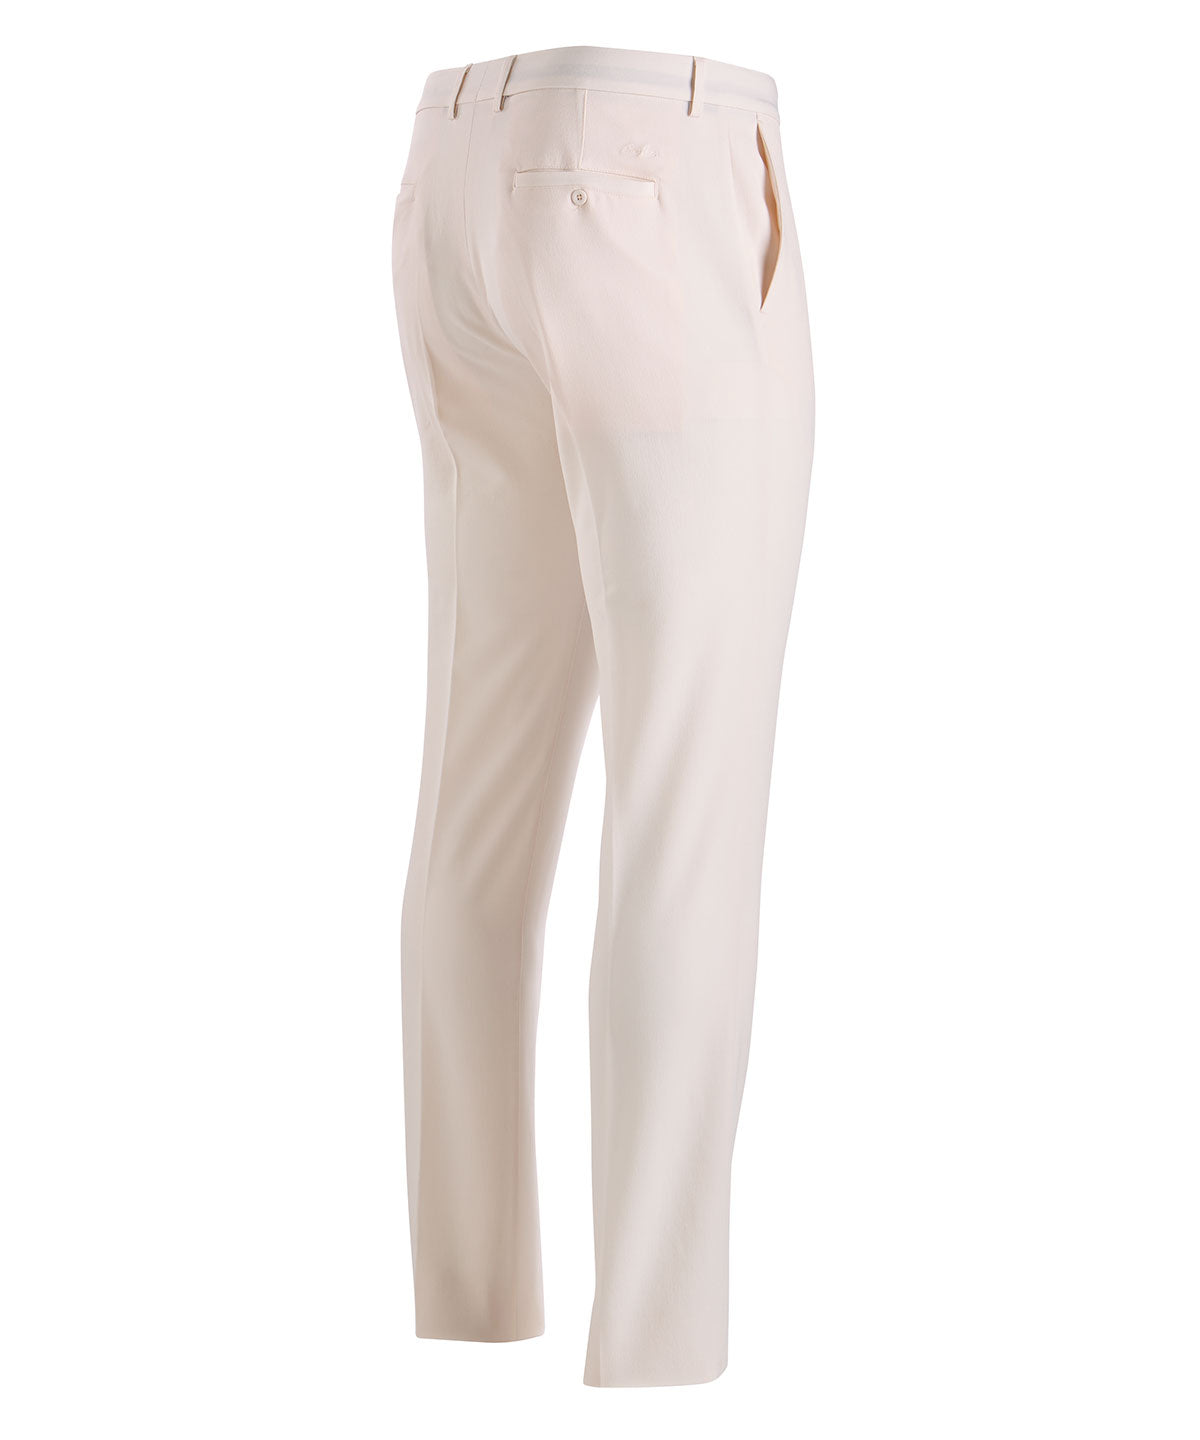 Performance Stretch Heather Trouser